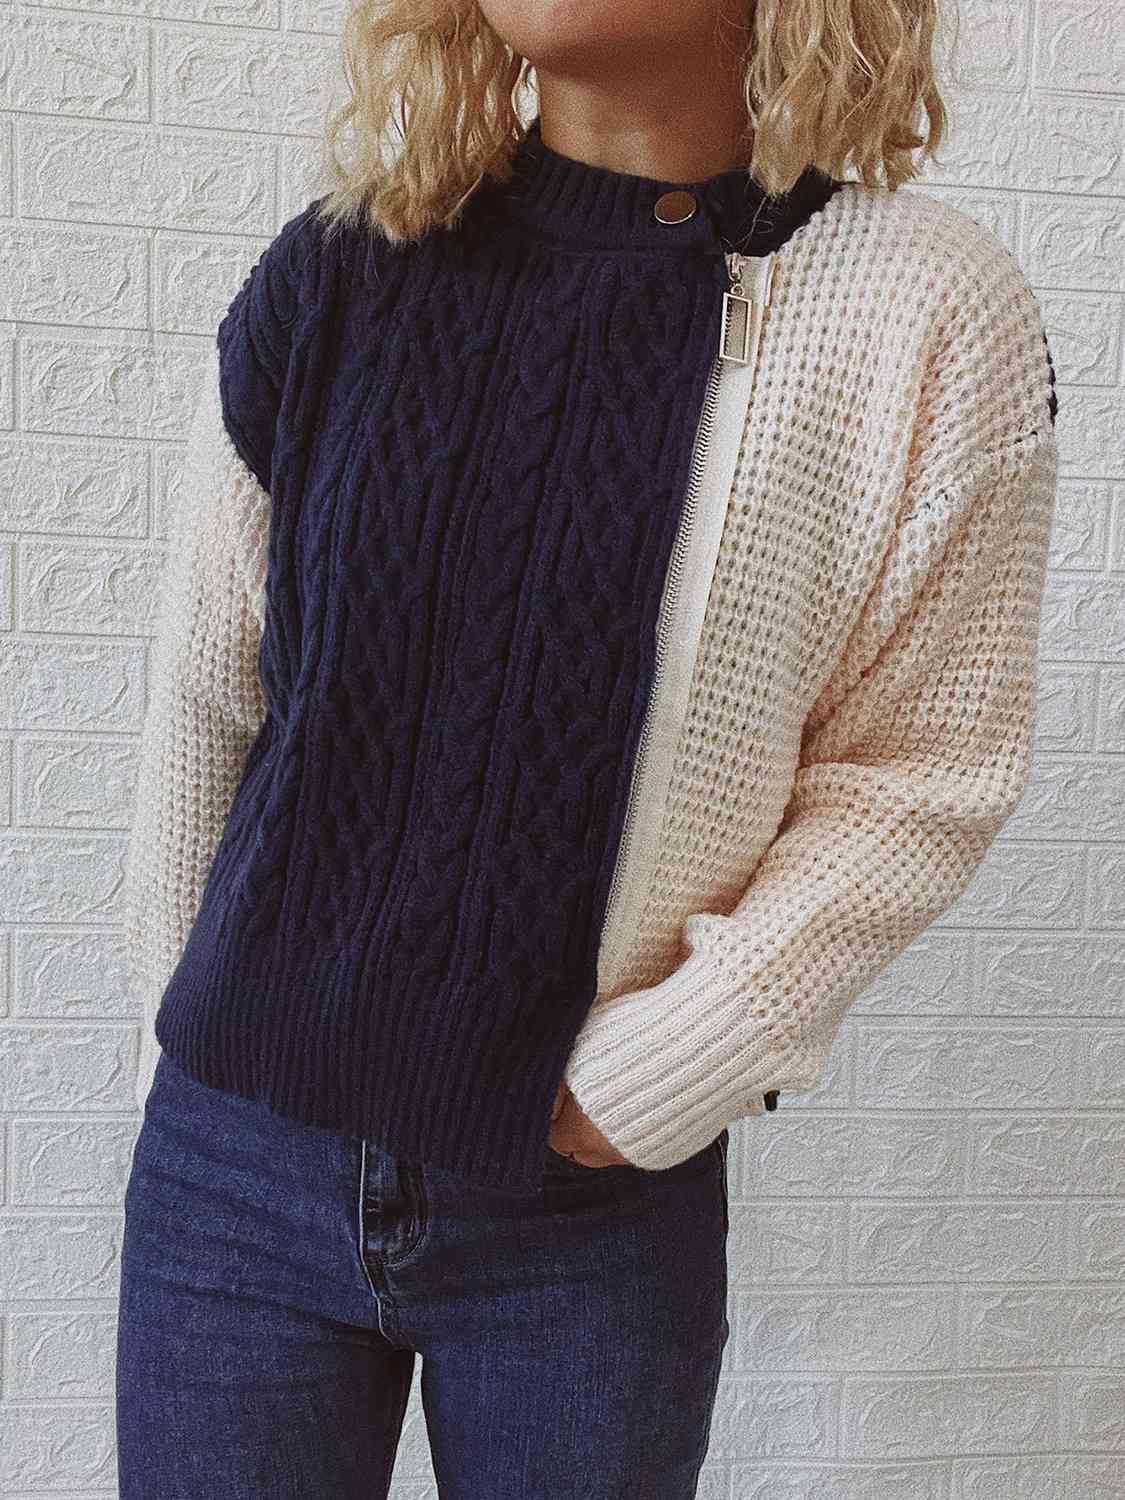 Gray Cable-Knit Contrast Zip-Up Cardigan